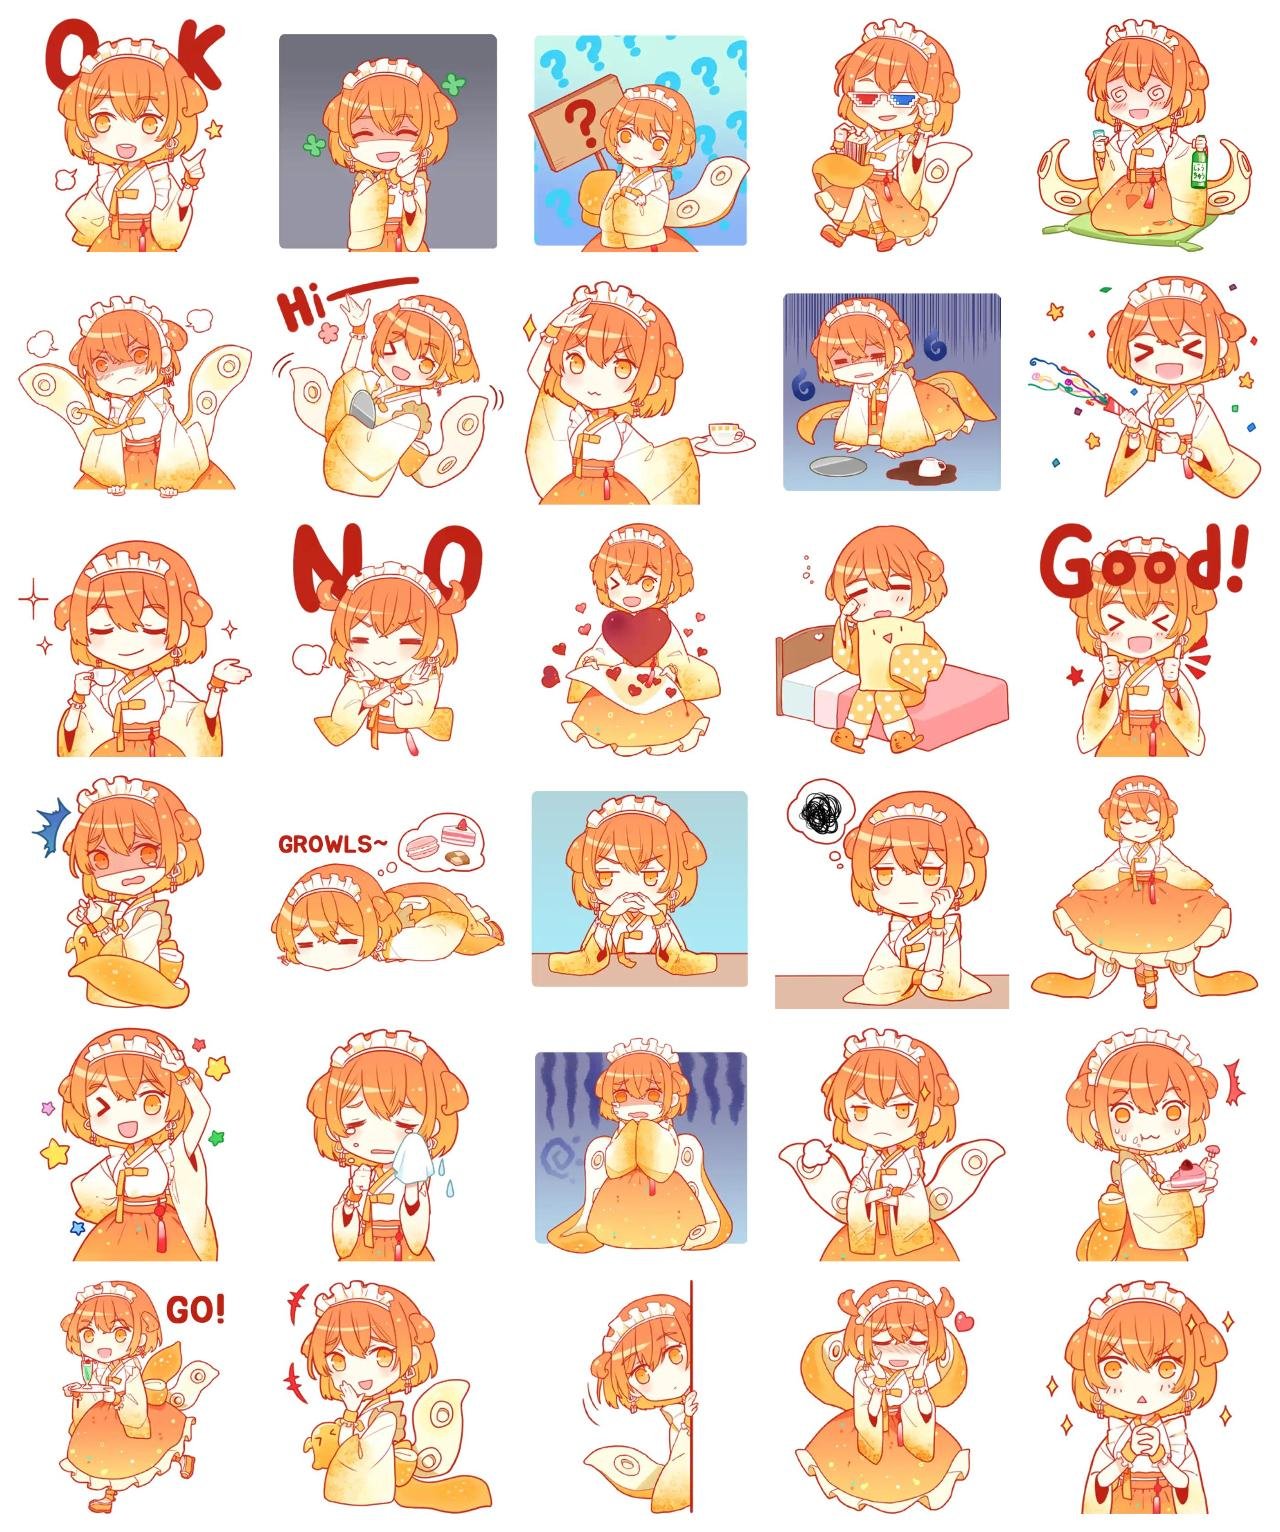 Octopus maid Umu Animation/Cartoon sticker pack for Whatsapp, Telegram, Signal, and others chatting and message apps